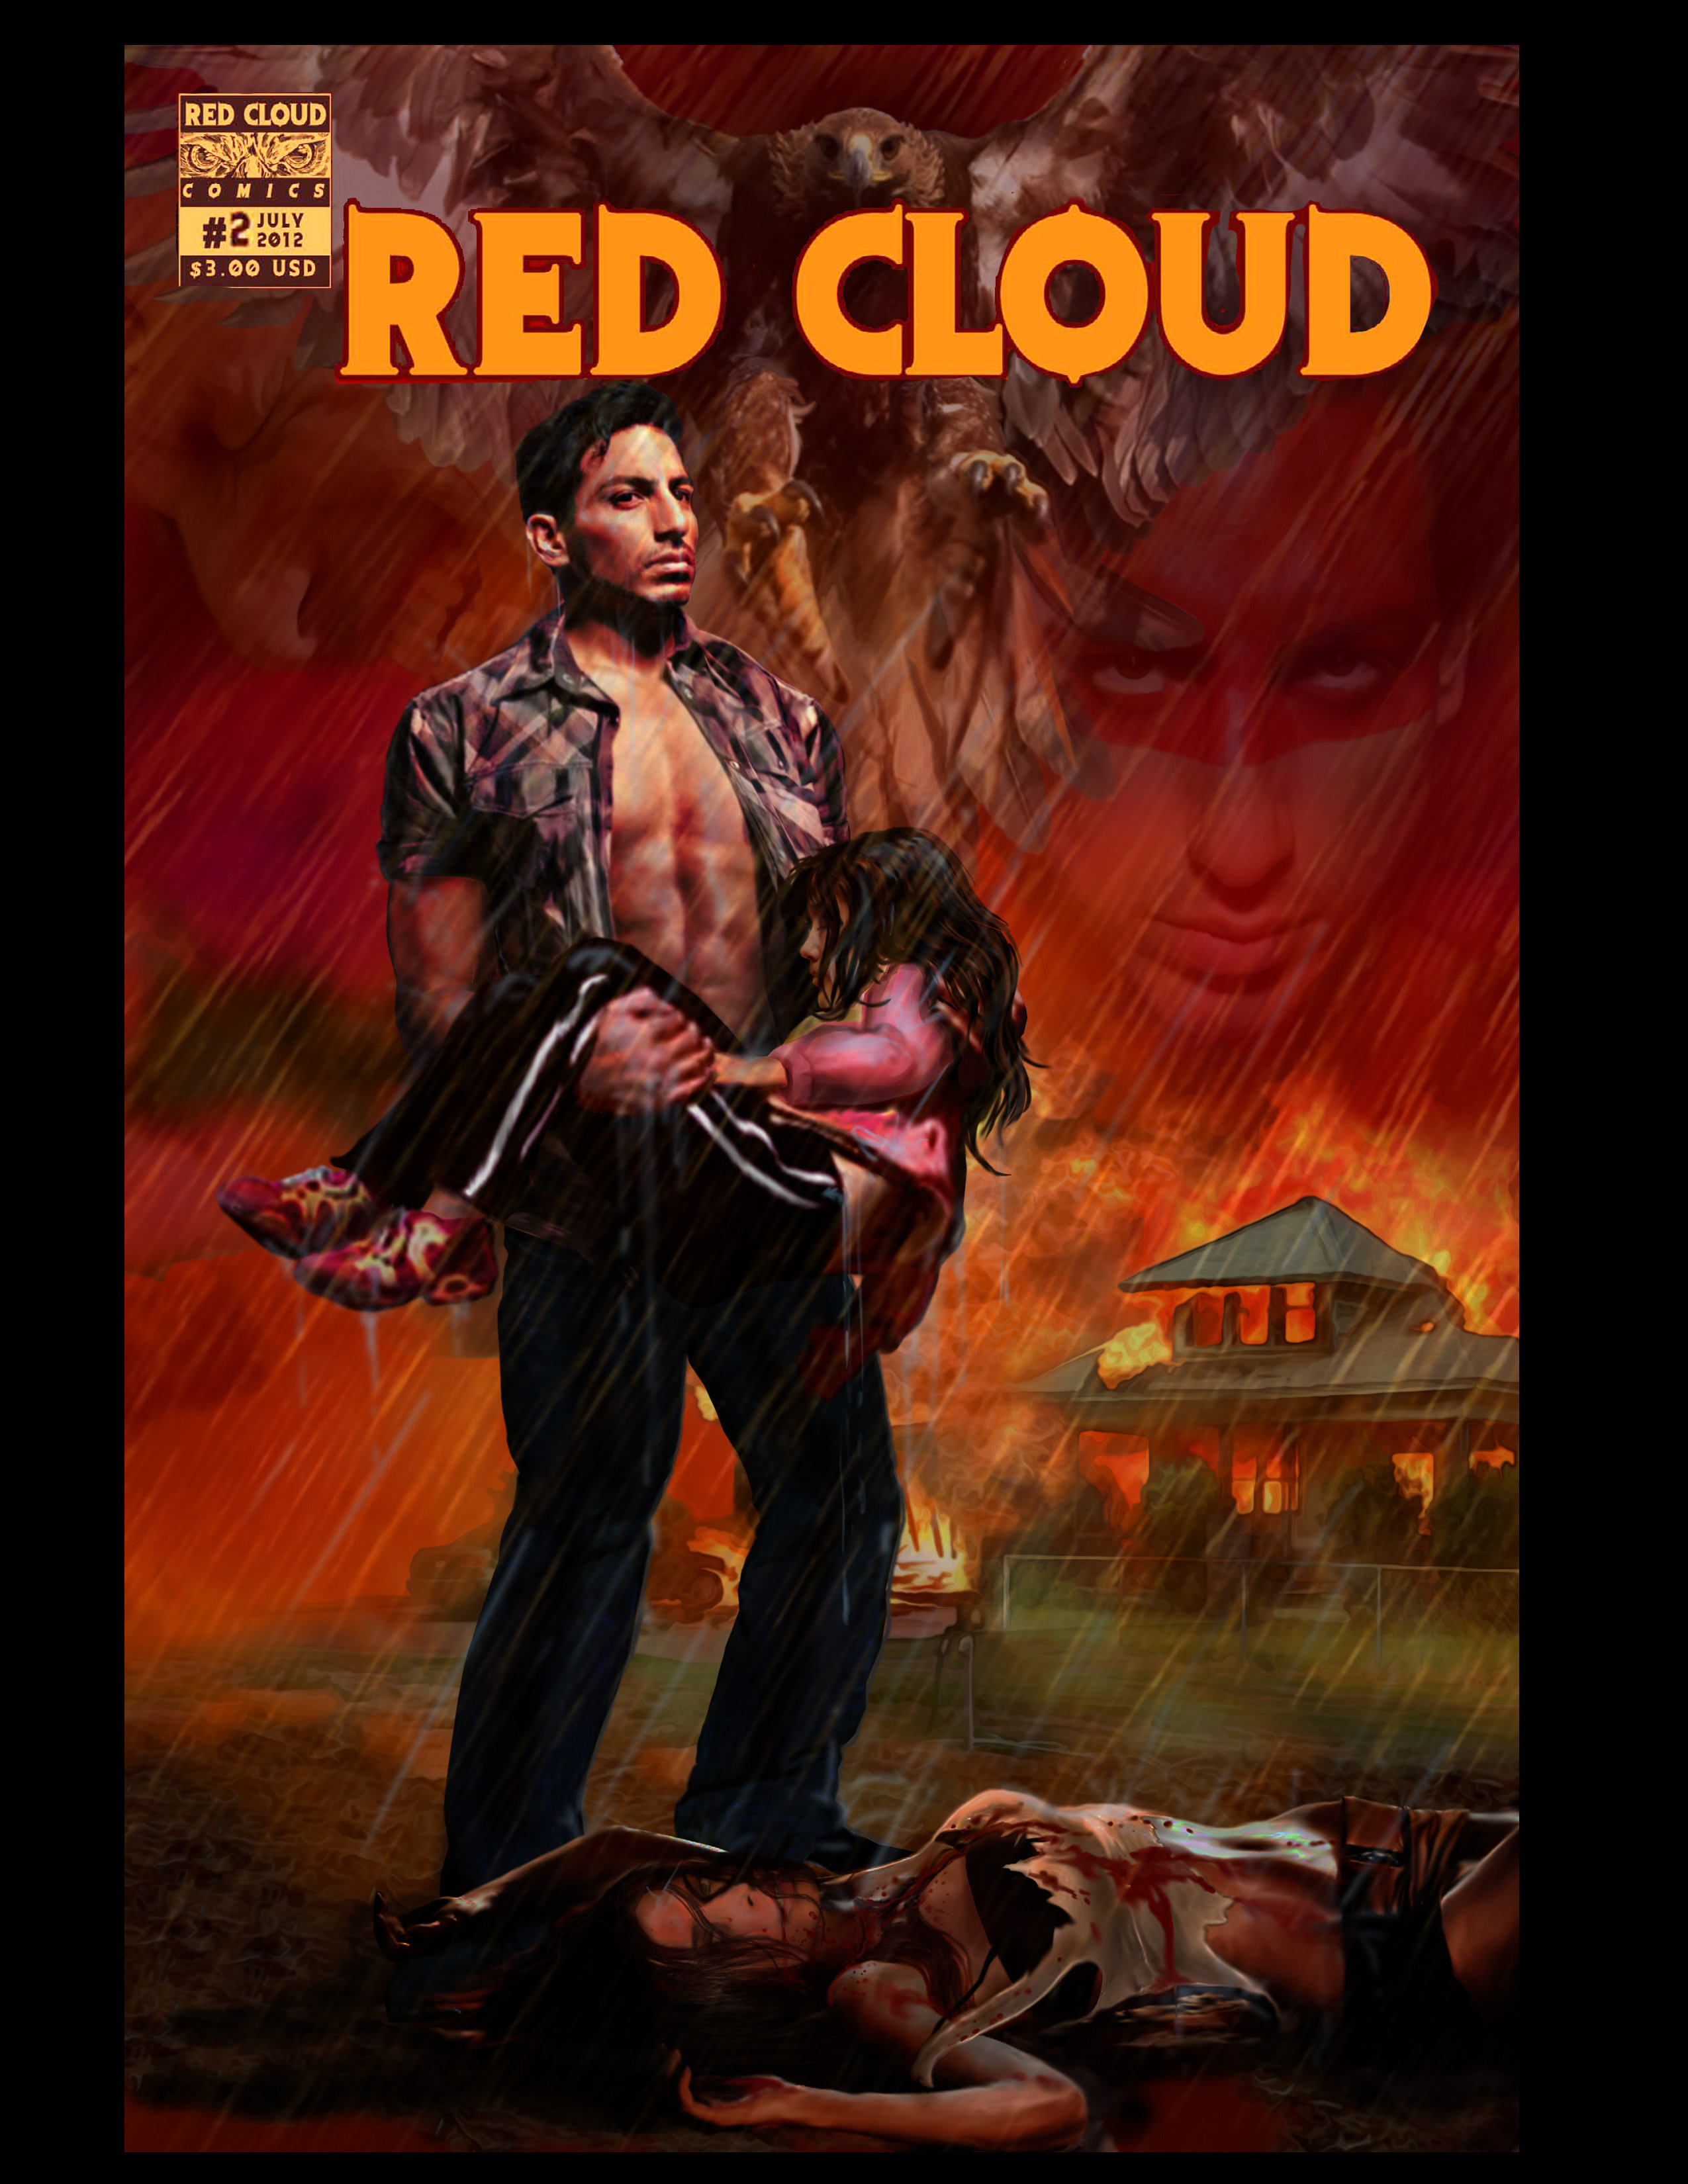 Issue #2 Cover - Alex Kruz as Jake Red Cloud finding his family dead in Issue #2